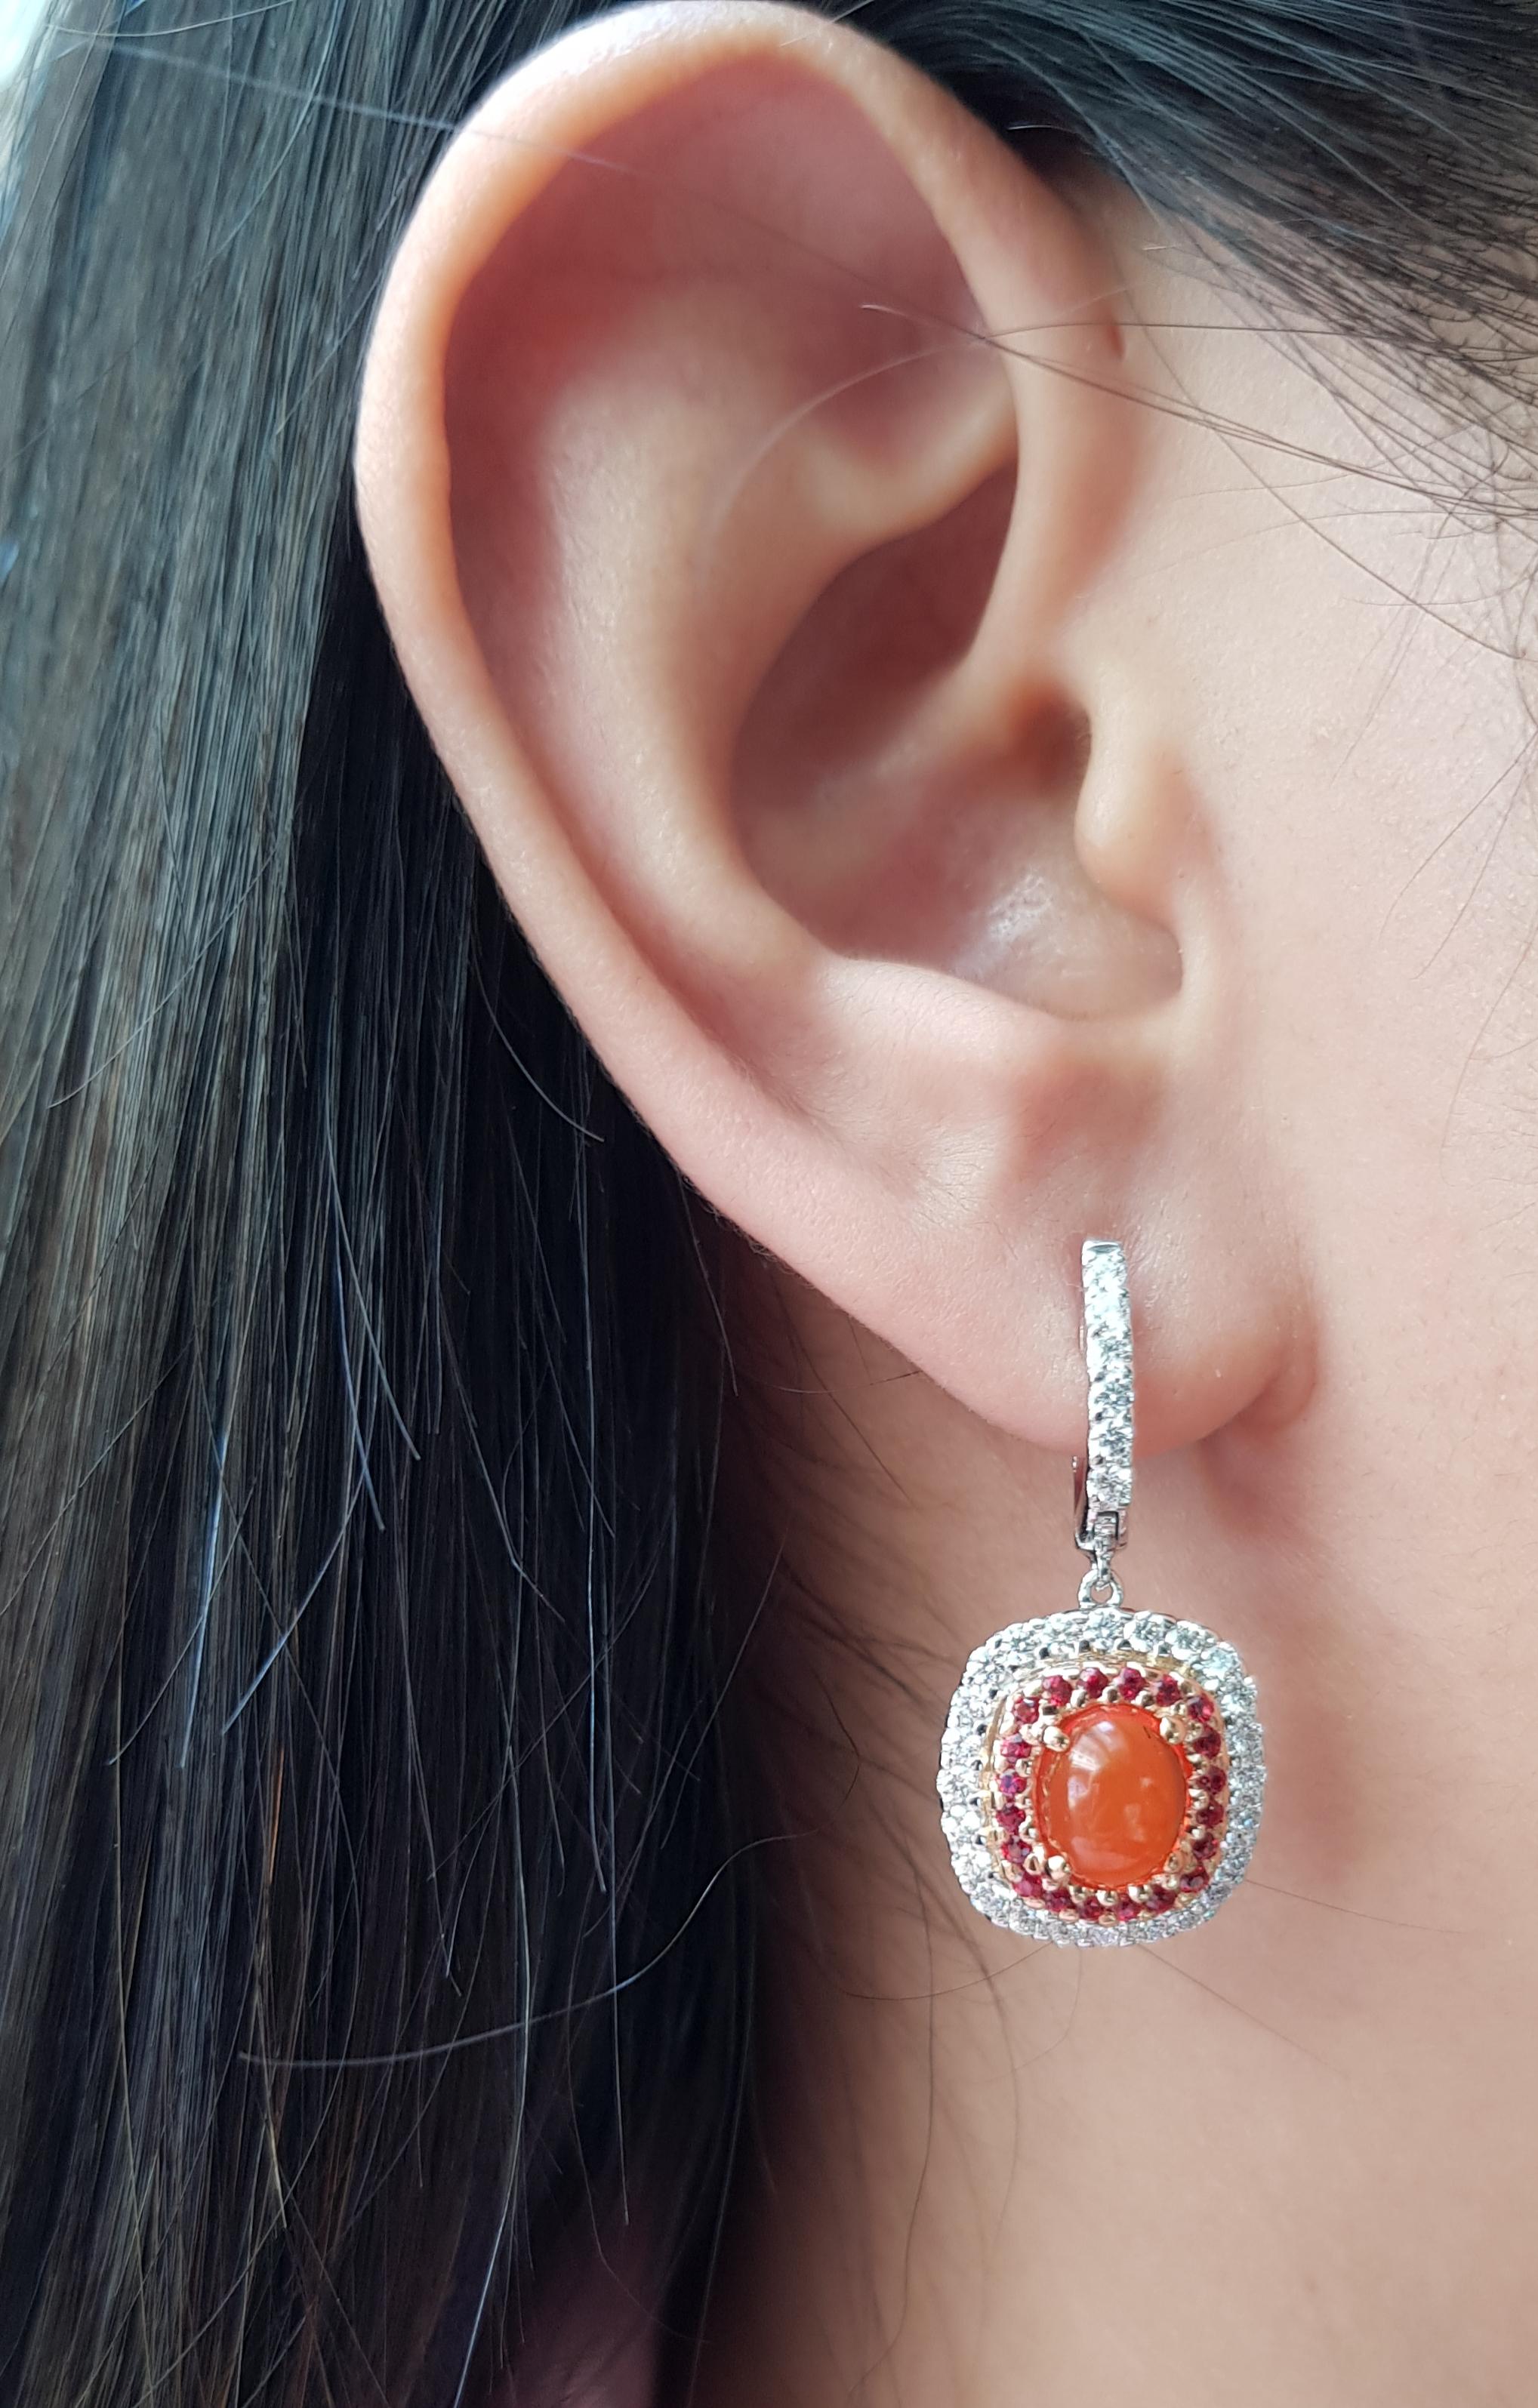 Fire Opal 2.21 carats with Orange Sapphire 0.58 carat and Diamond 1.12 carats Earrings set in 18 Karat White Gold Settings

Width: 1.5 cm
Length: 3.2 cm 

